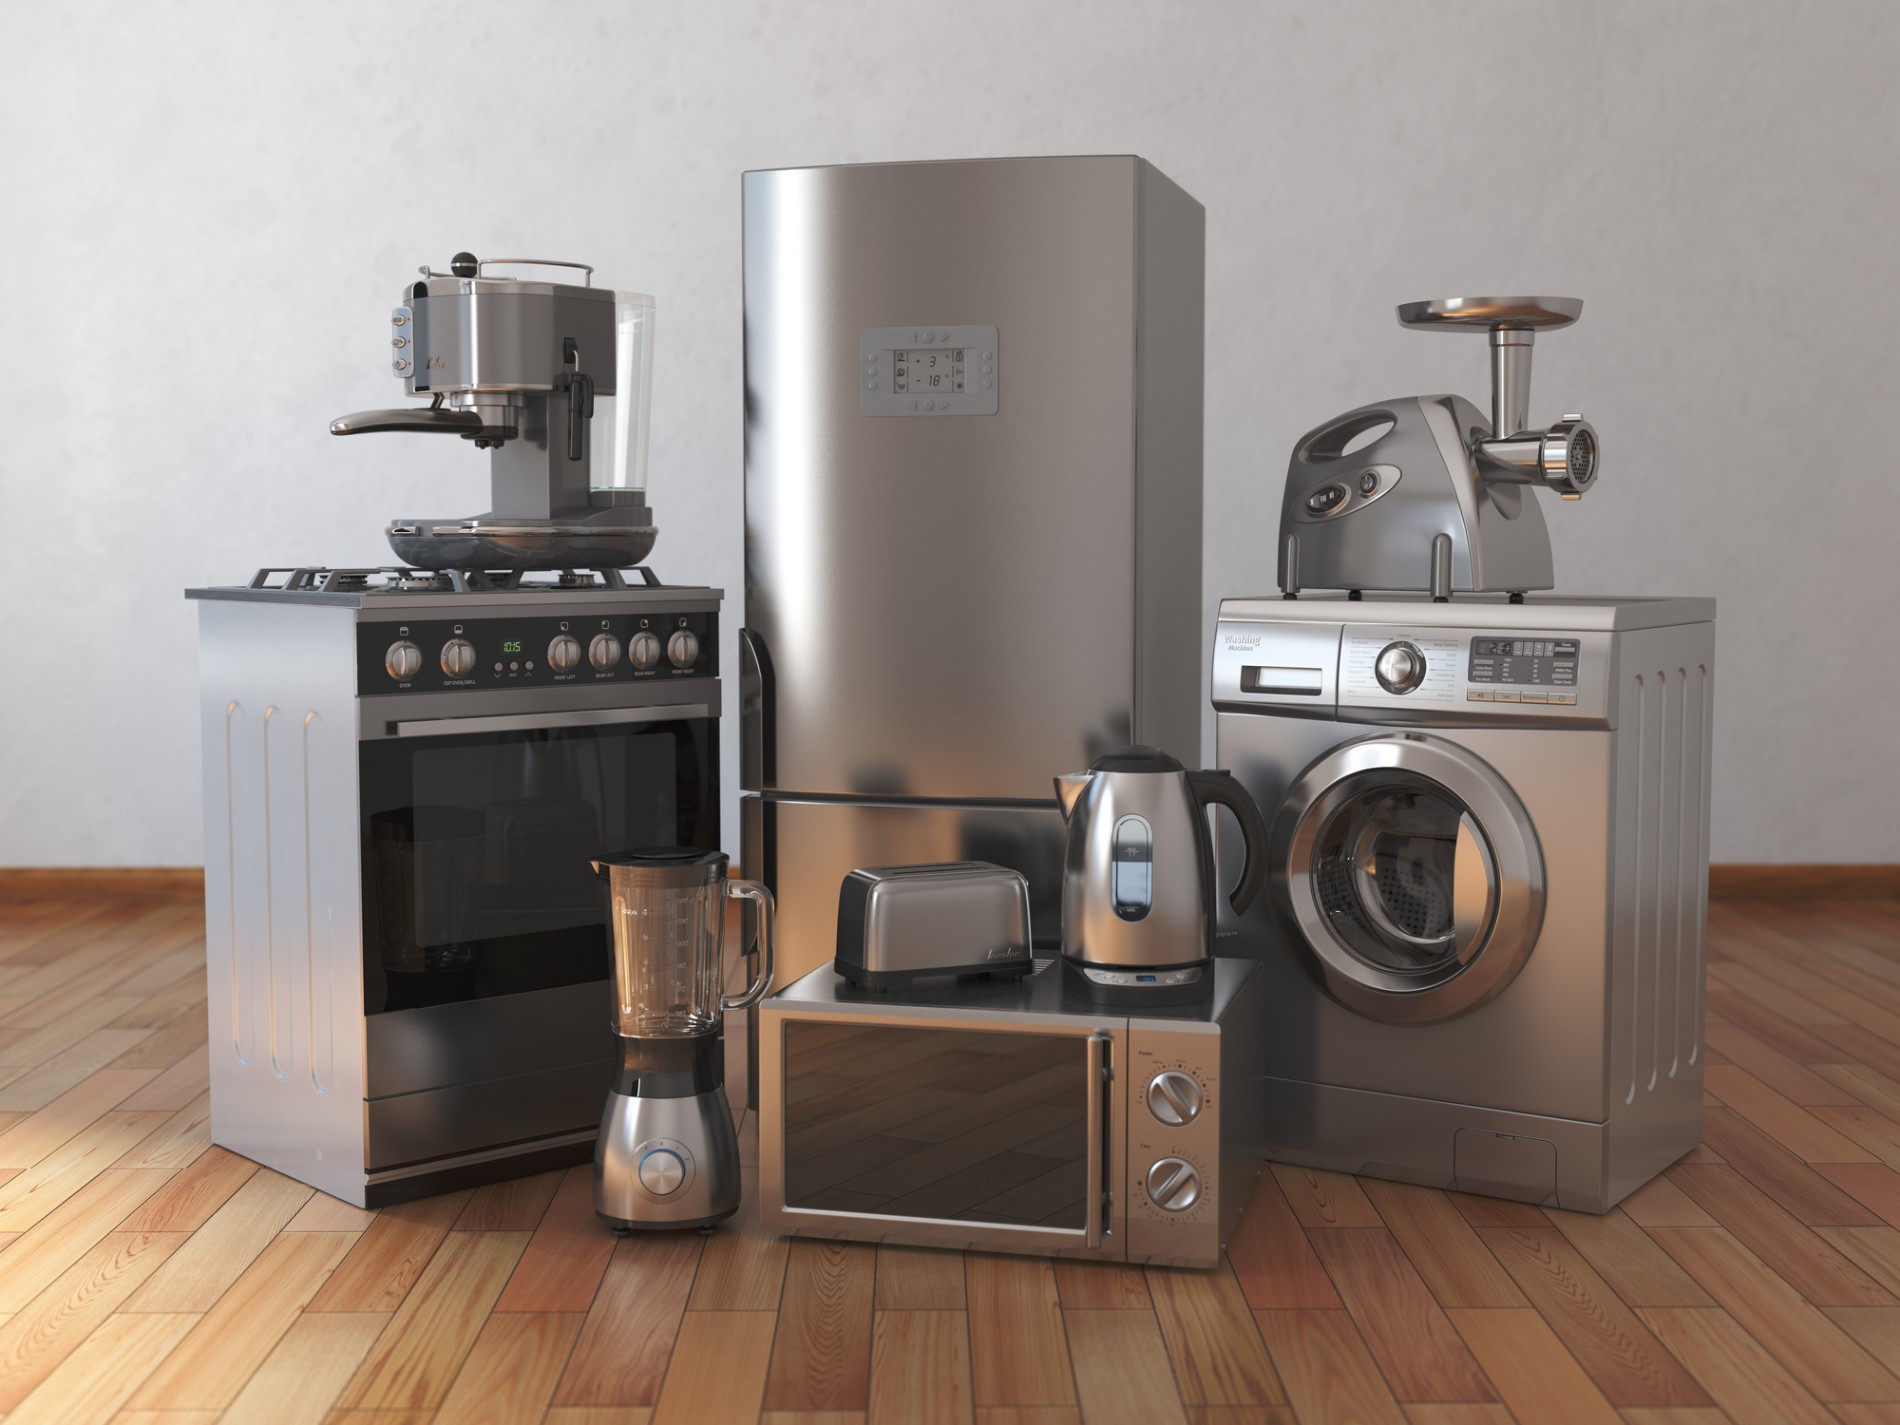 Thinking About Your Orlando Custom Home Appliances | Alair Homes Orlando